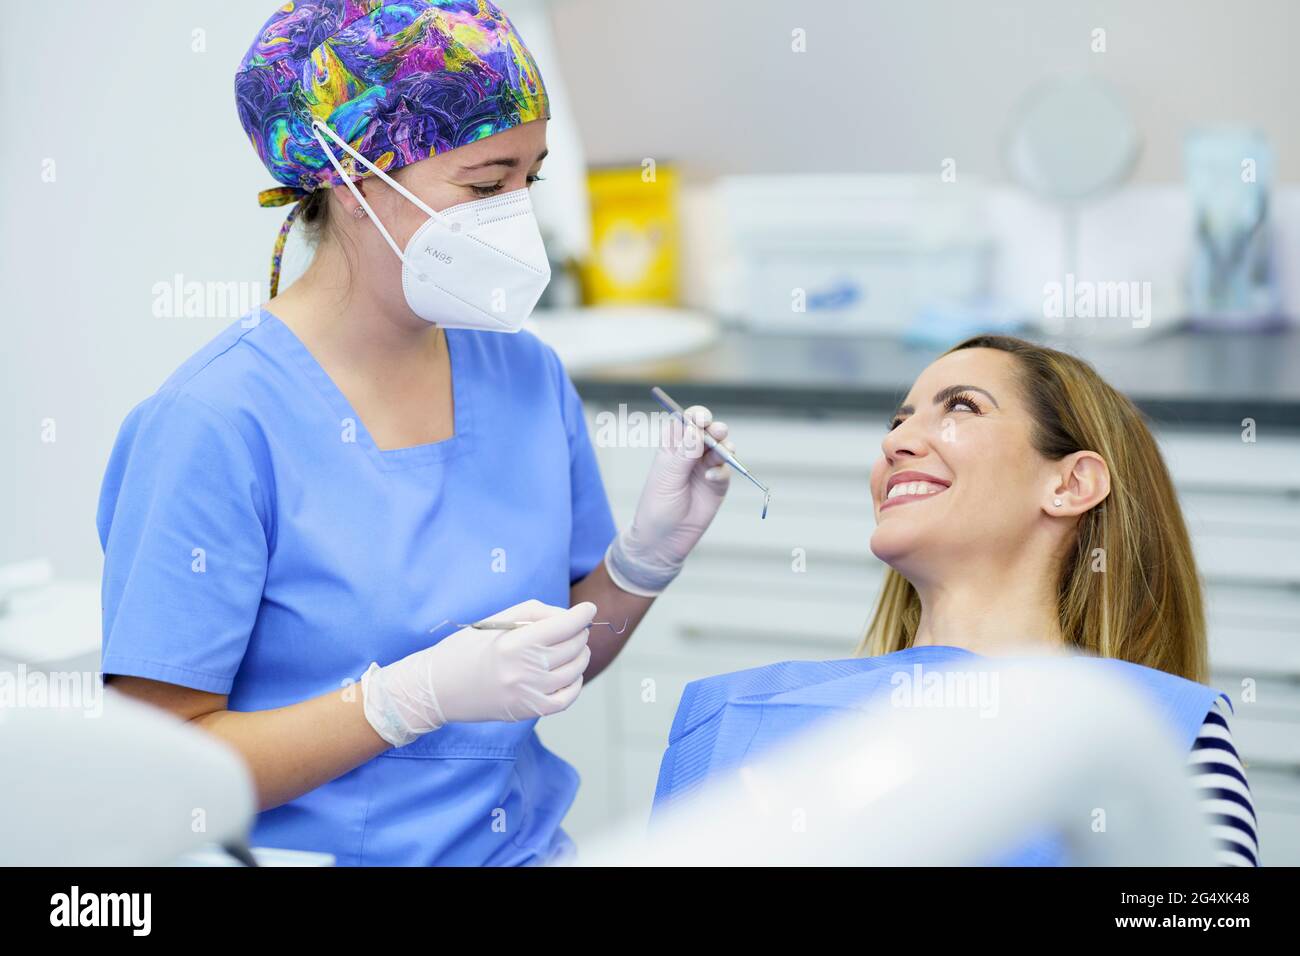 Dental Clinic Worker With Face Mask - a Royalty Free Stock Photo from  Photocase